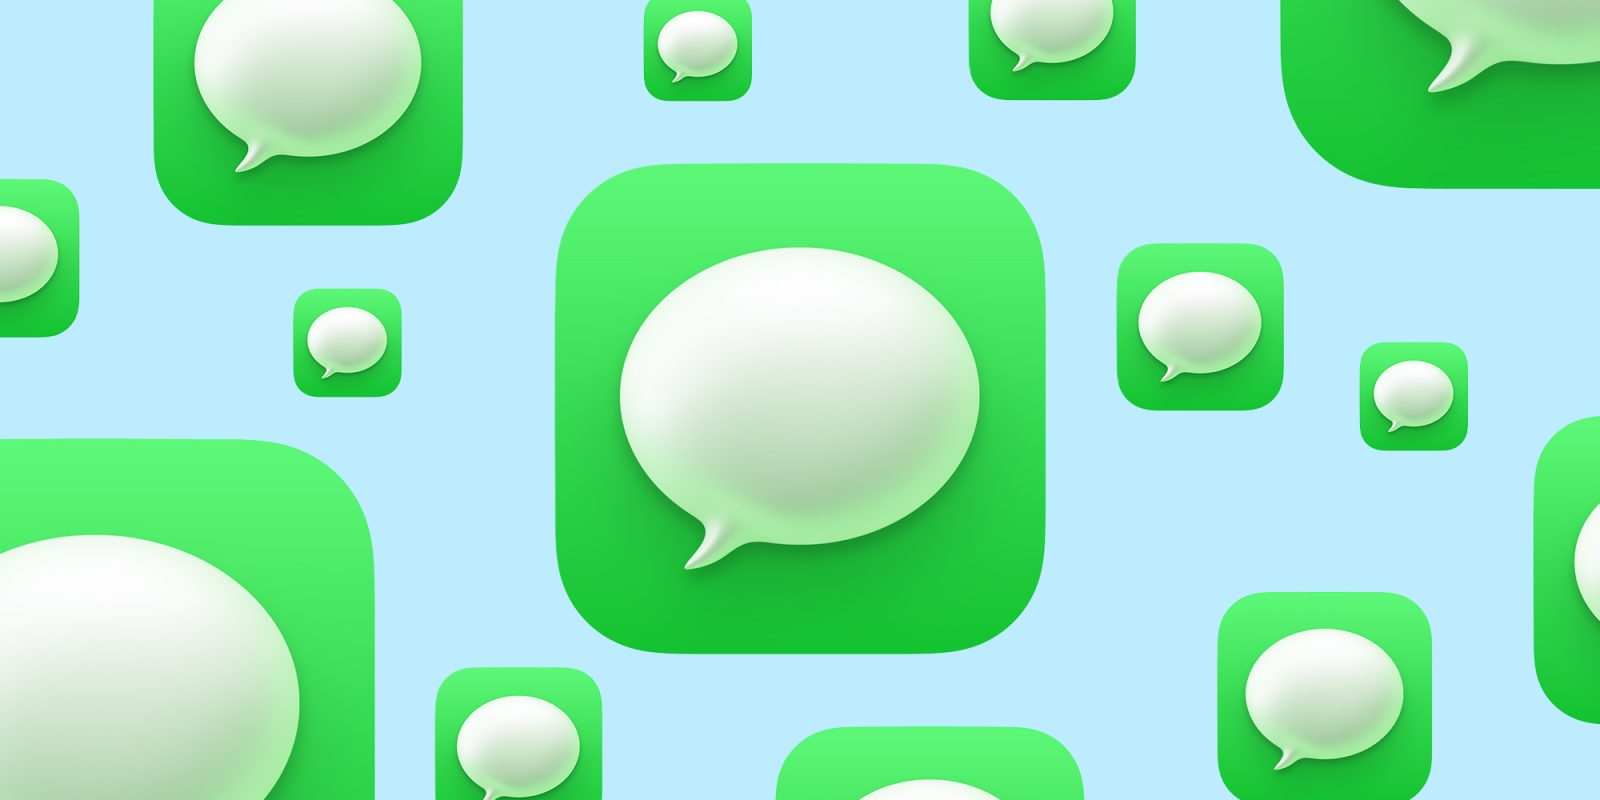 iMessage waiting for activation? Here's how to fix it